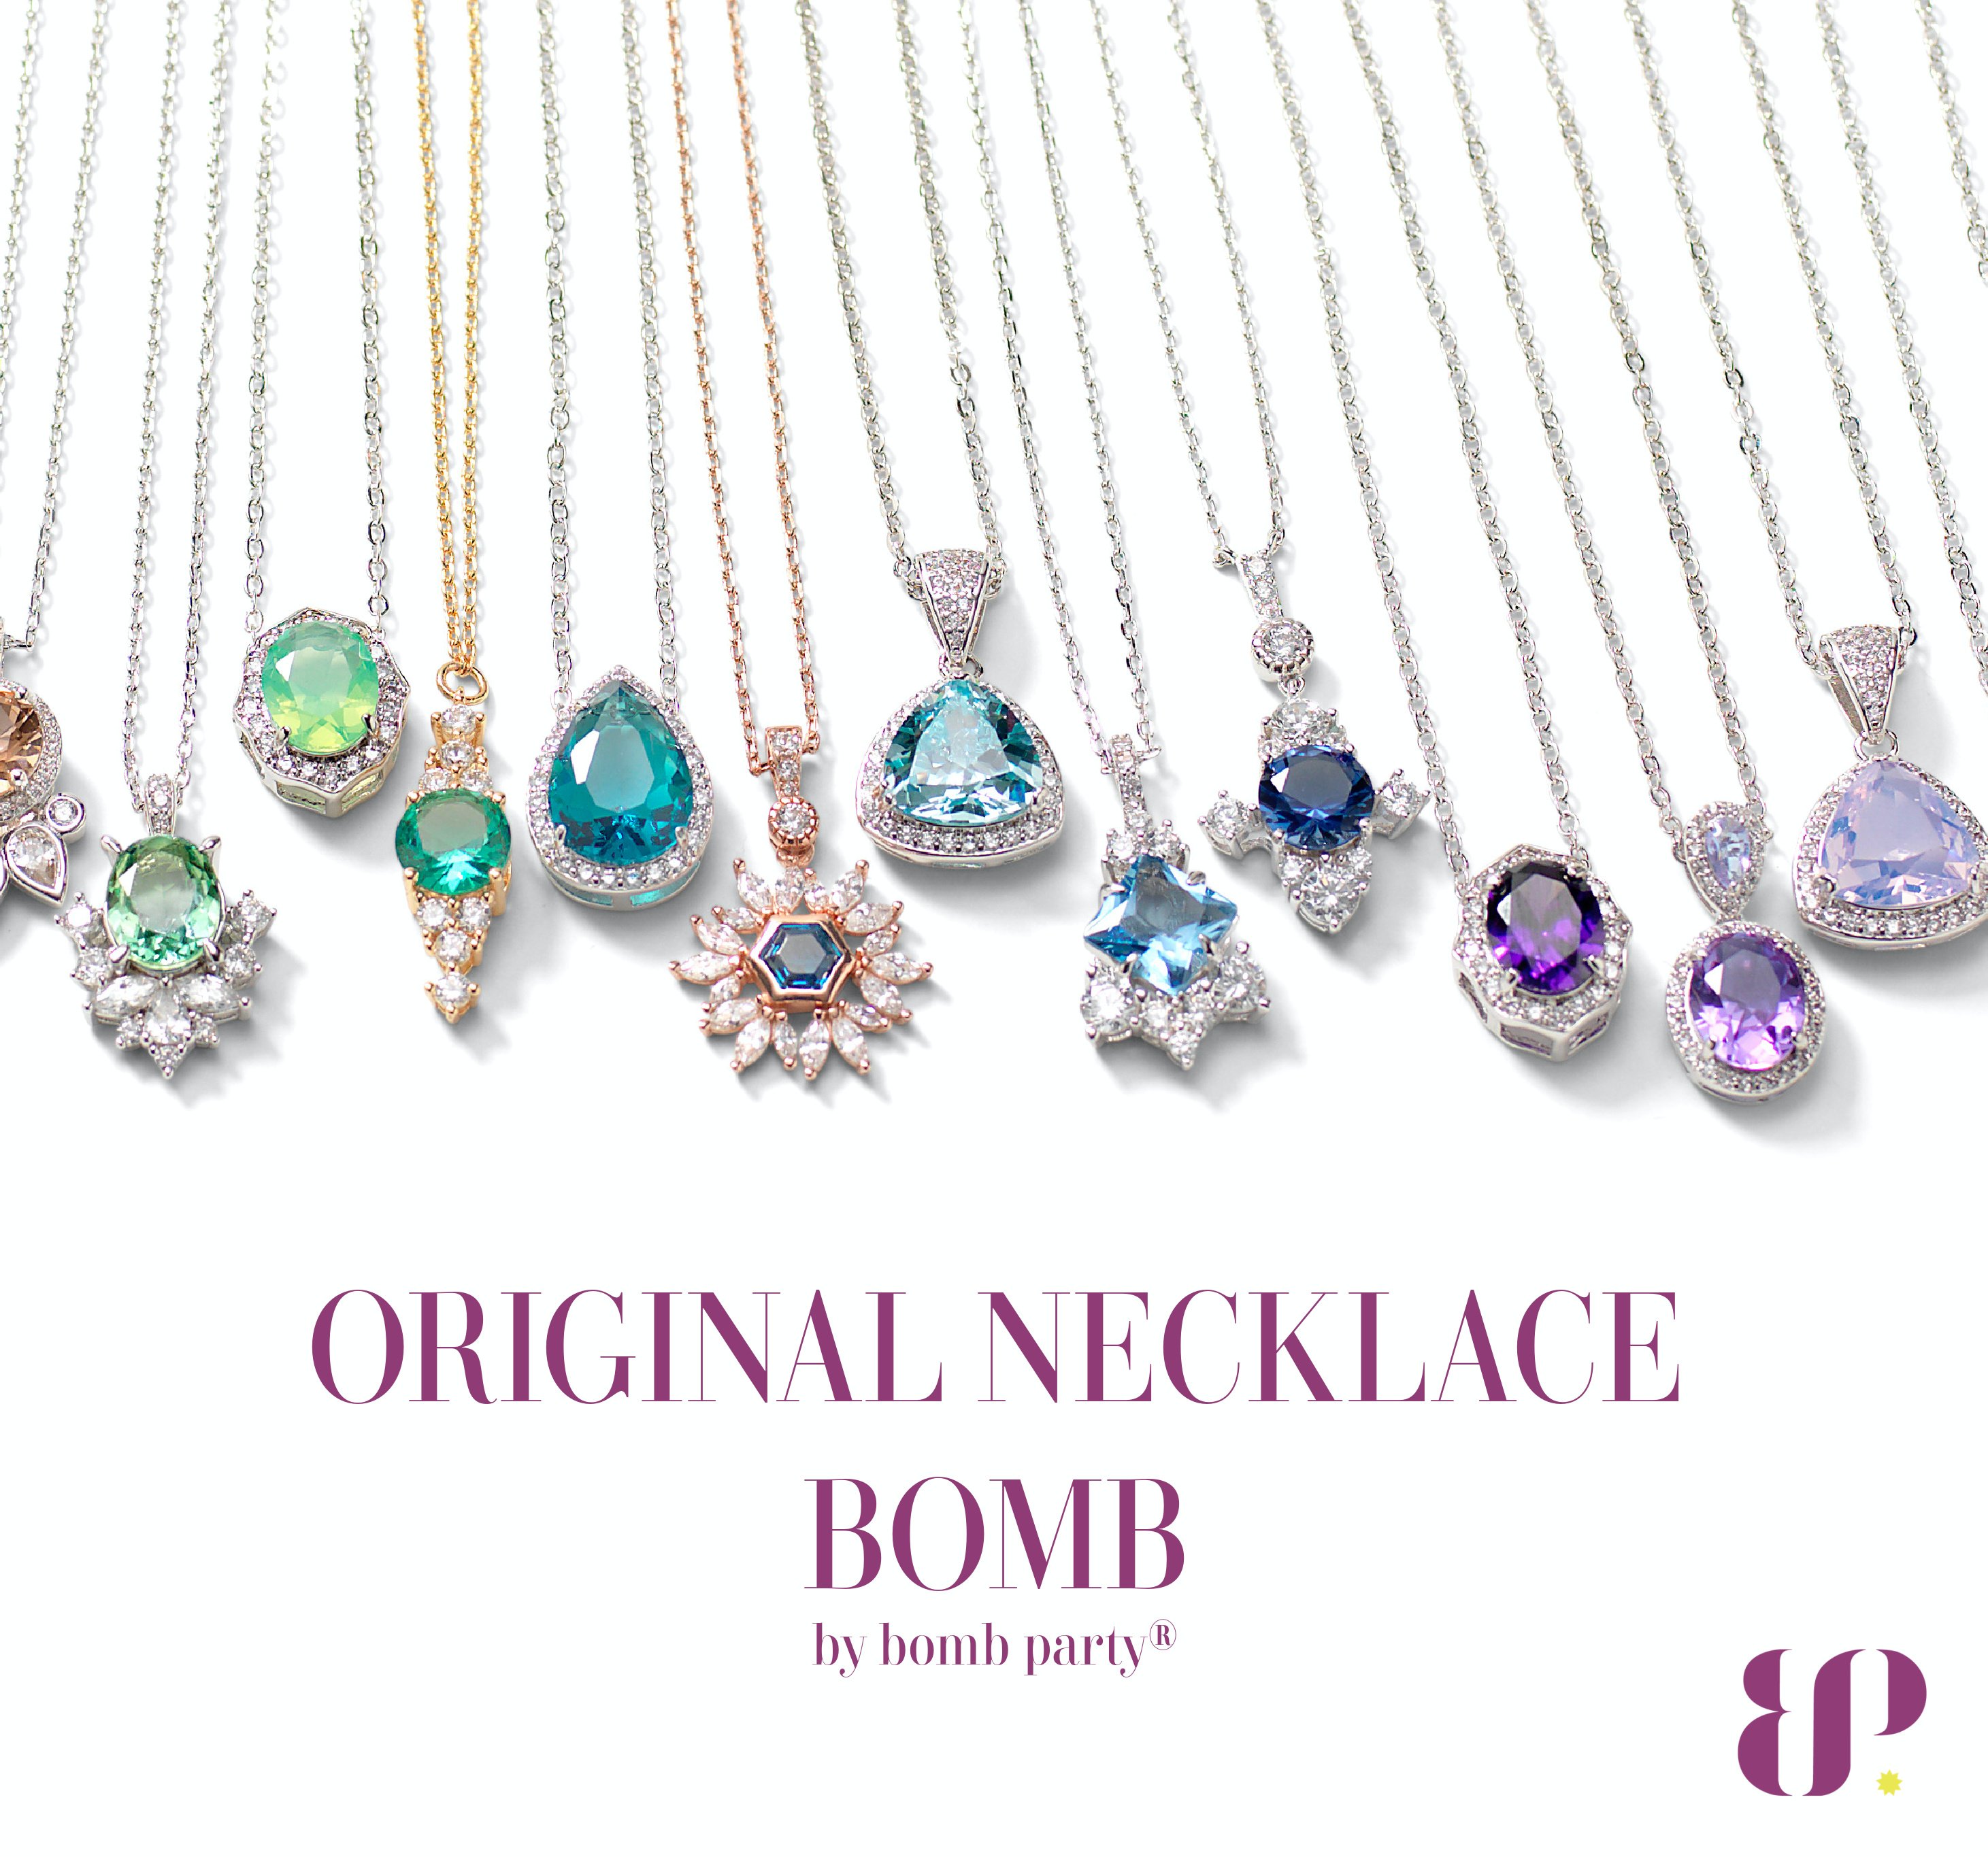 Image for Original Necklace Bomb